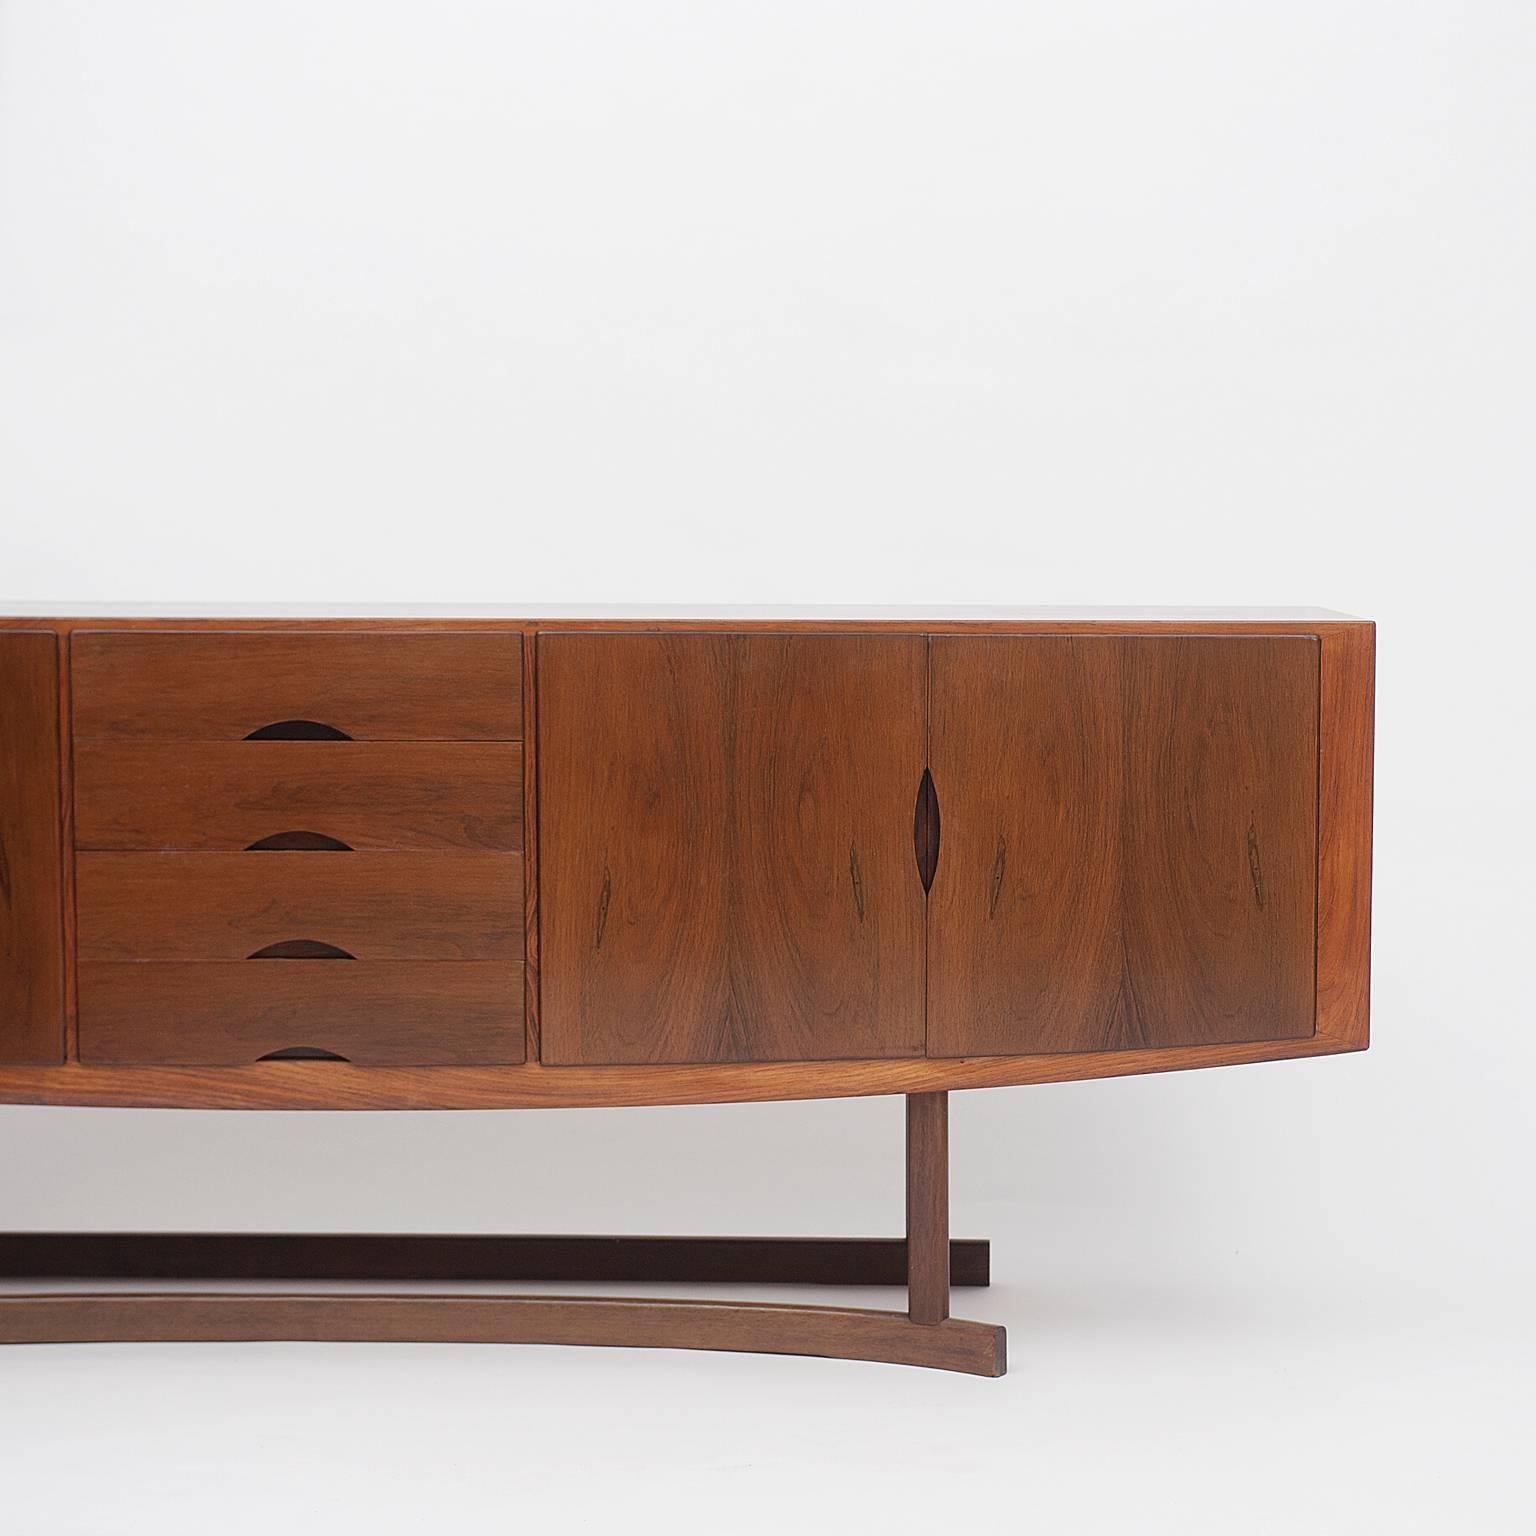 Rare credenza with elegant curves designed by Johannes Andersen of Hans Bech (Model HB 20).